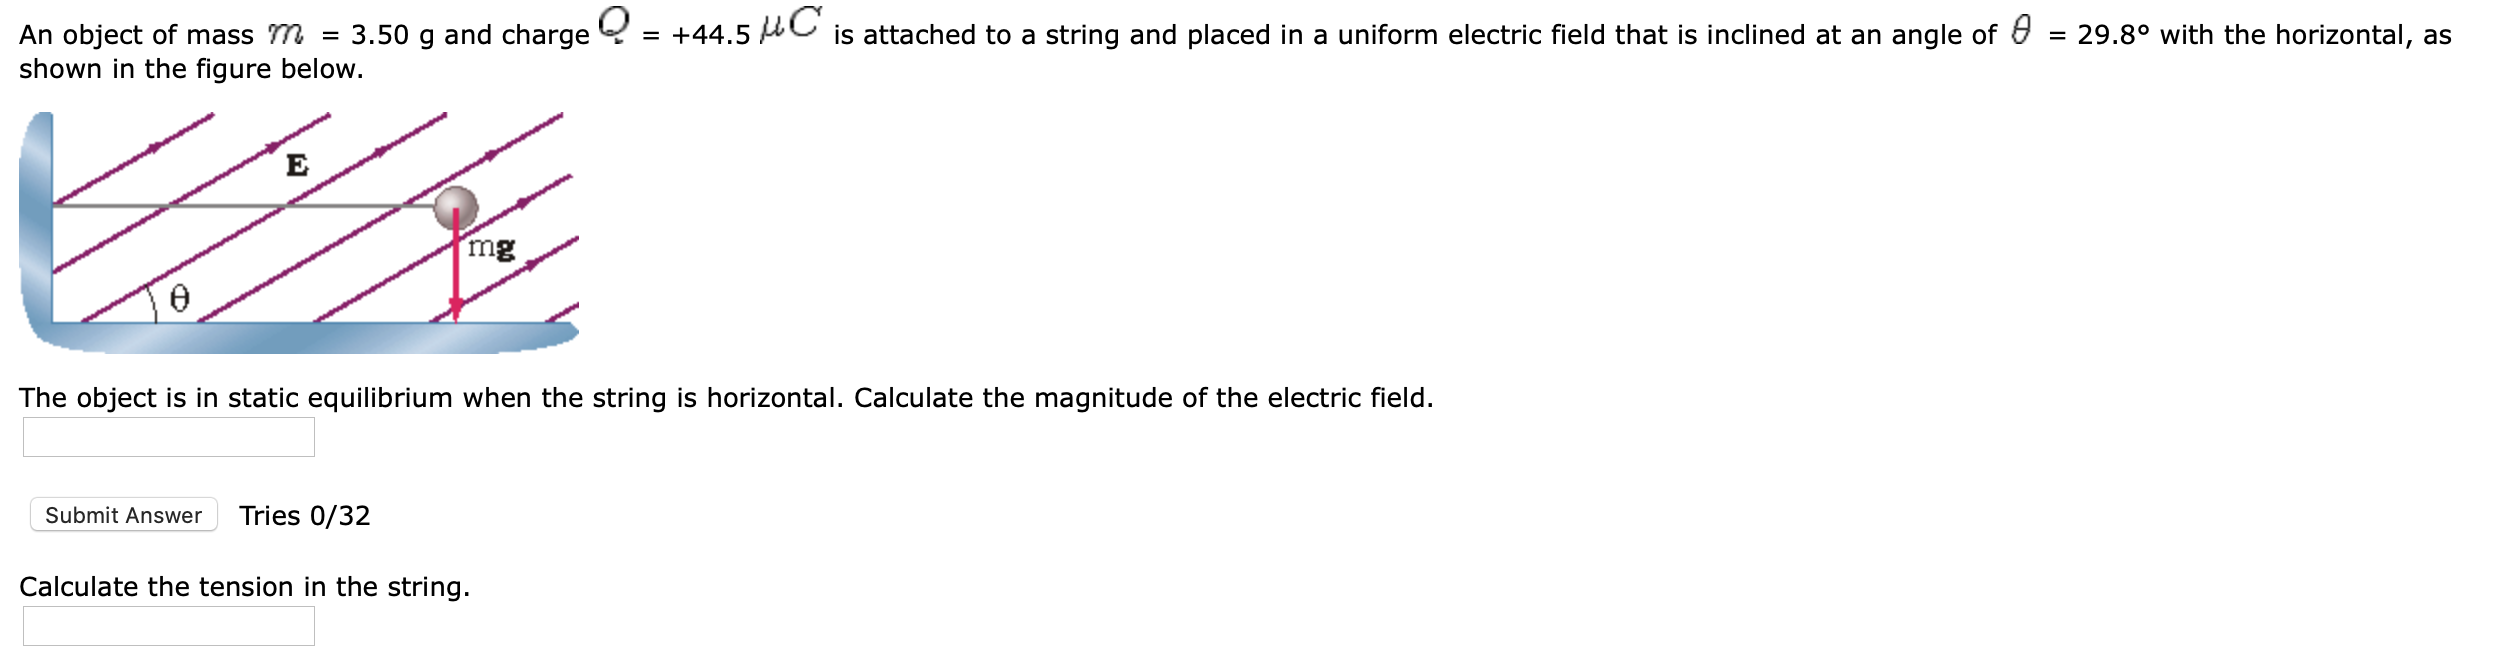 An object of mass m = 3.50 g and charge Y = +44.5 C is attached to a string and placed in a uniform electric field that is inclined at an angle of & = 29.8° with the horizontal, as
shown in the figure below.
mg
The object is in static equilibrium when the string is horizontal. Calculate the magnitude of the electric field.
Submit Answer
Tries 0/32
Calculate the tension in the string.
